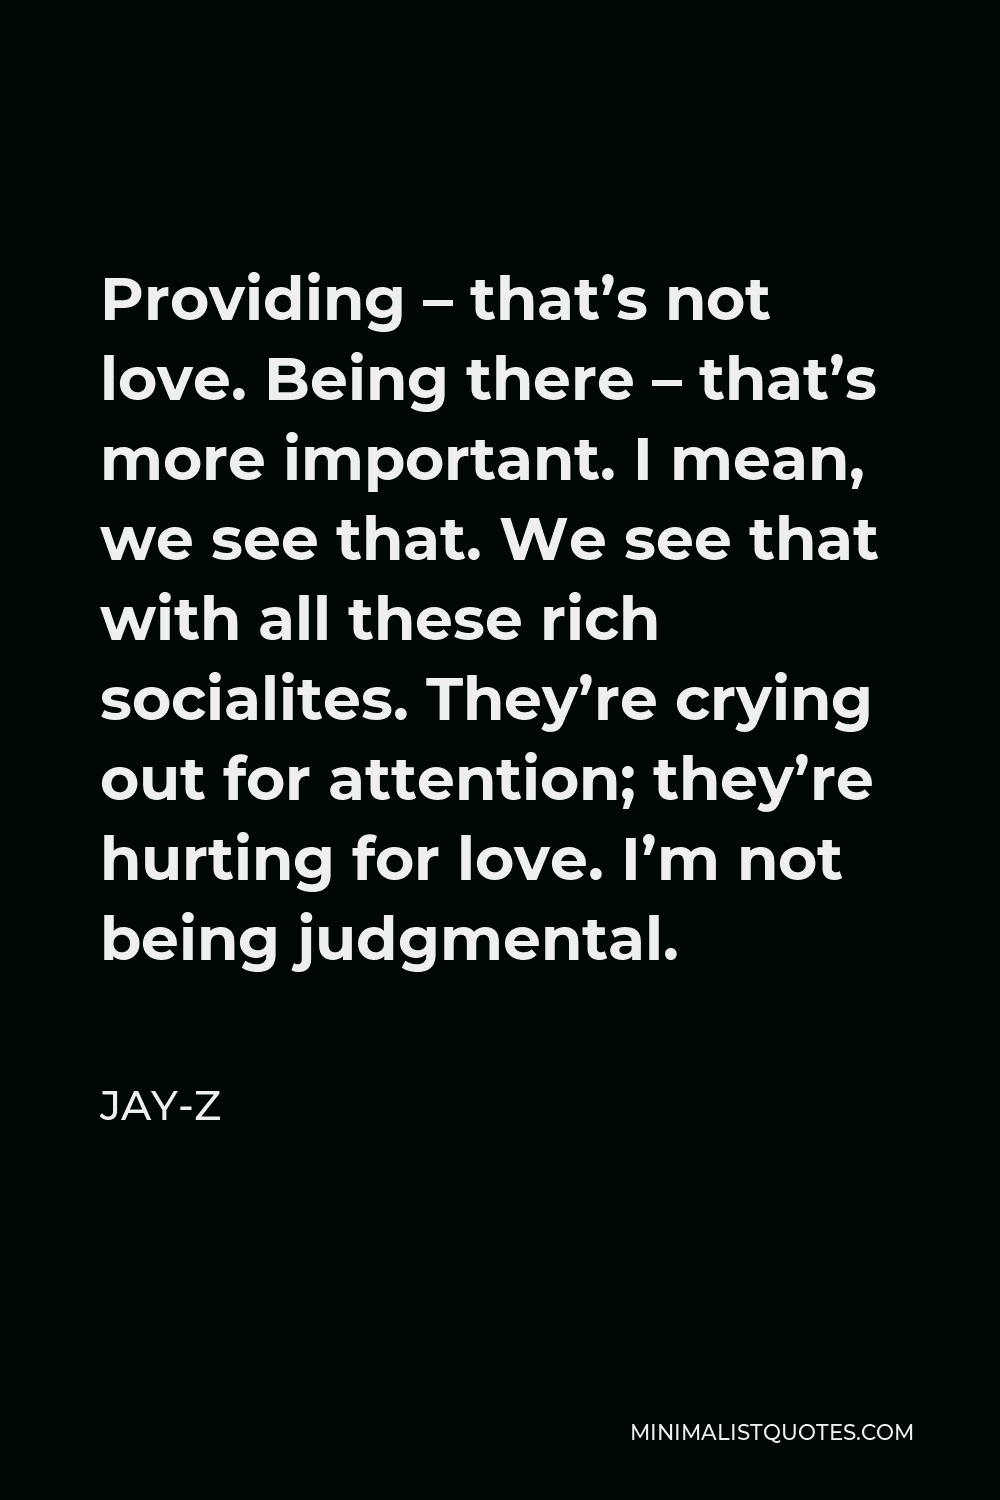 Jay-Z Quote - Providing – that’s not love. Being there – that’s more important. I mean, we see that. We see that with all these rich socialites. They’re crying out for attention; they’re hurting for love. I’m not being judgmental.